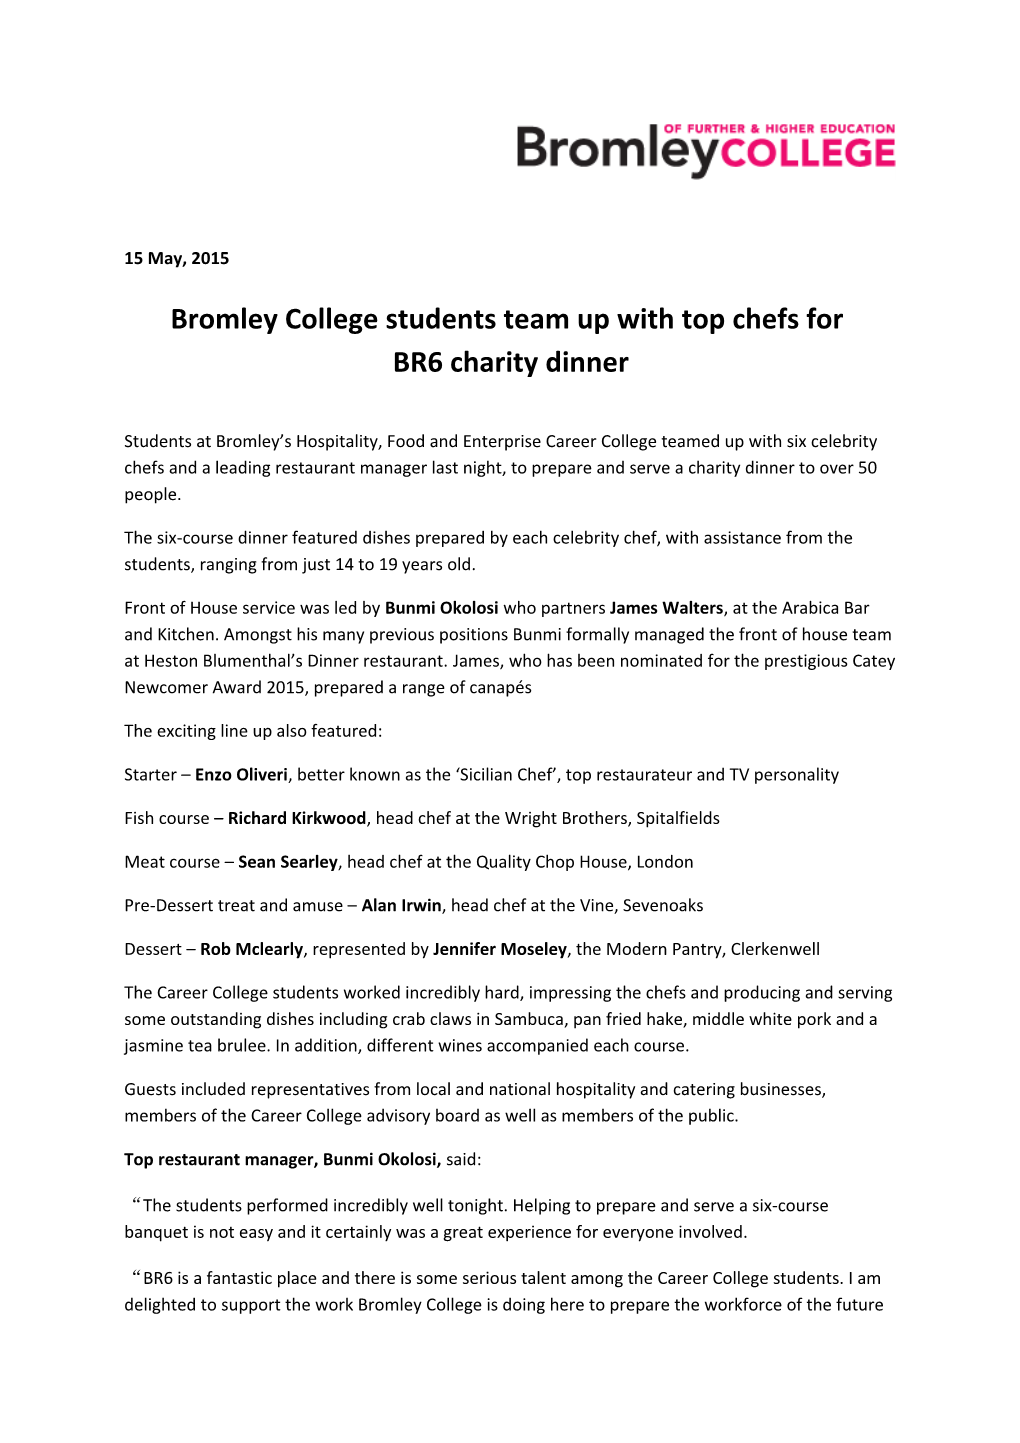 Bromley College Students Team up with Top Chefs For